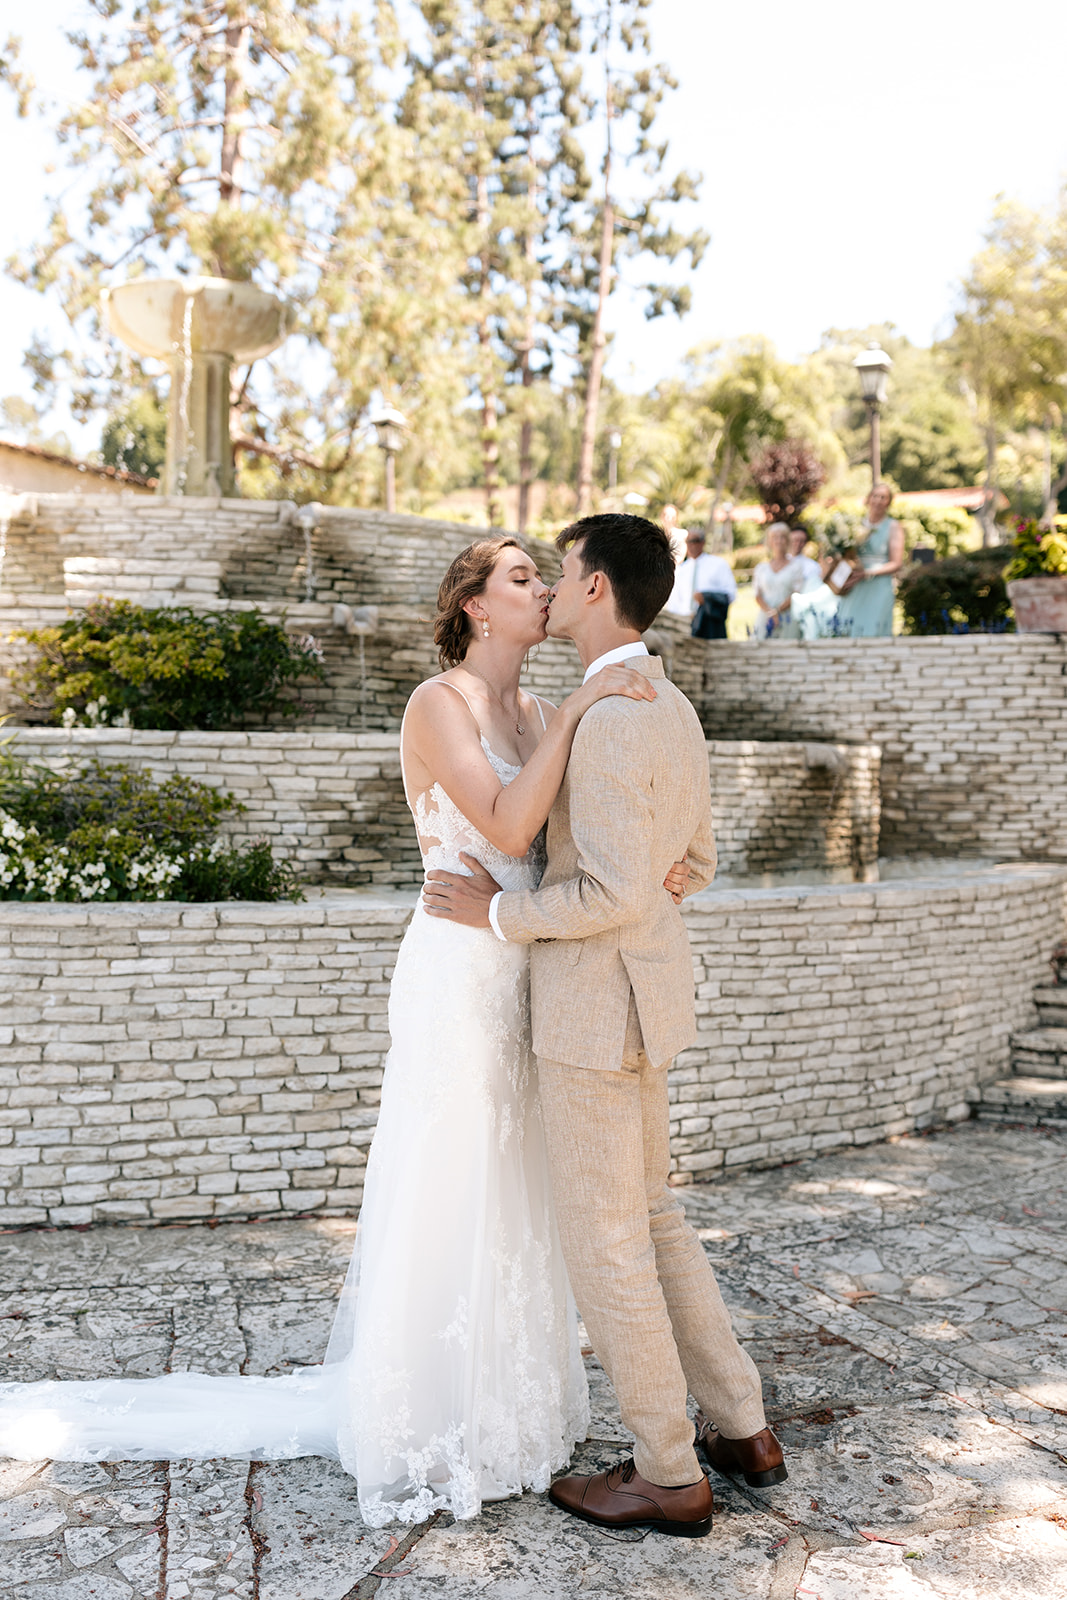 point vicente lighthouse wedding rancho palos verdes california first look bride and groom happy emotional hugging poses